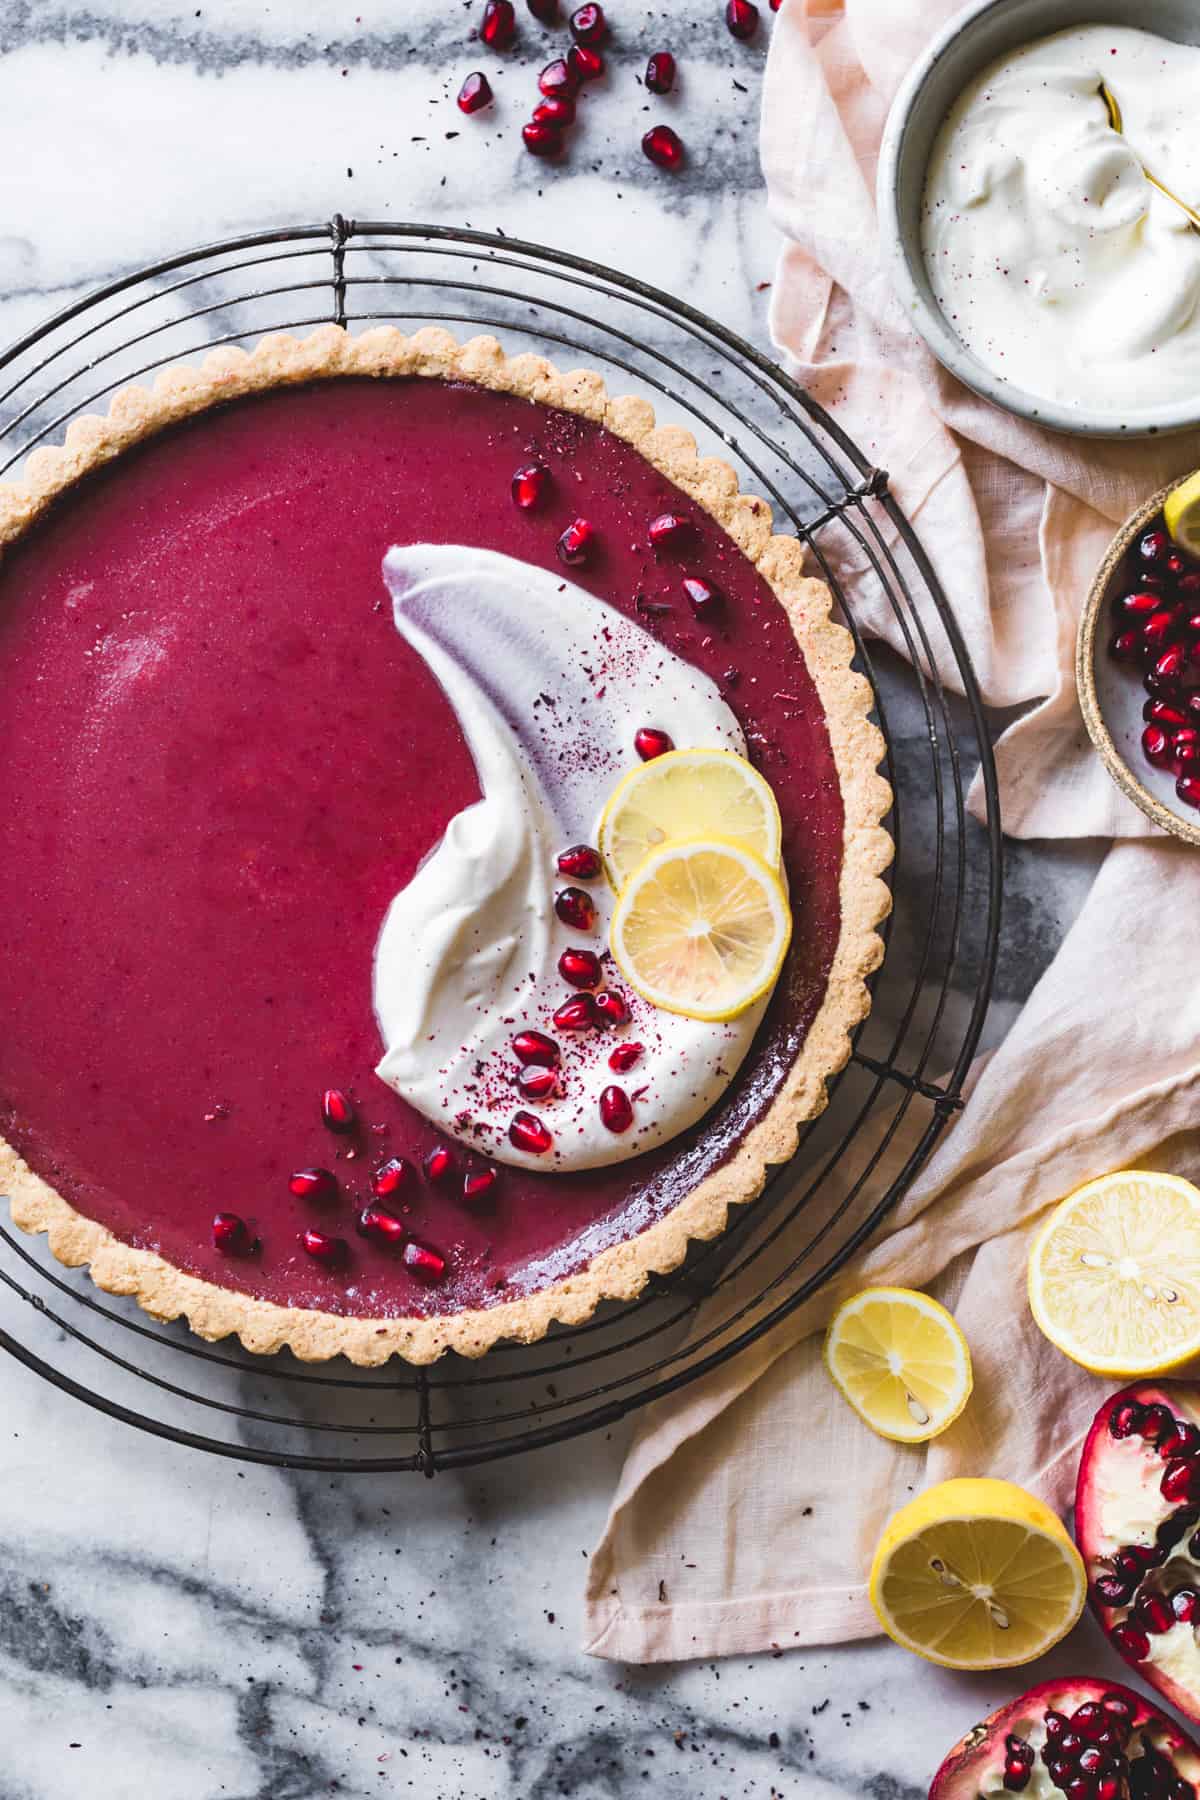 Pomegranate Tart with Hibiscus, Lemon, and Almond Flour Crust {gluten-free} on plate